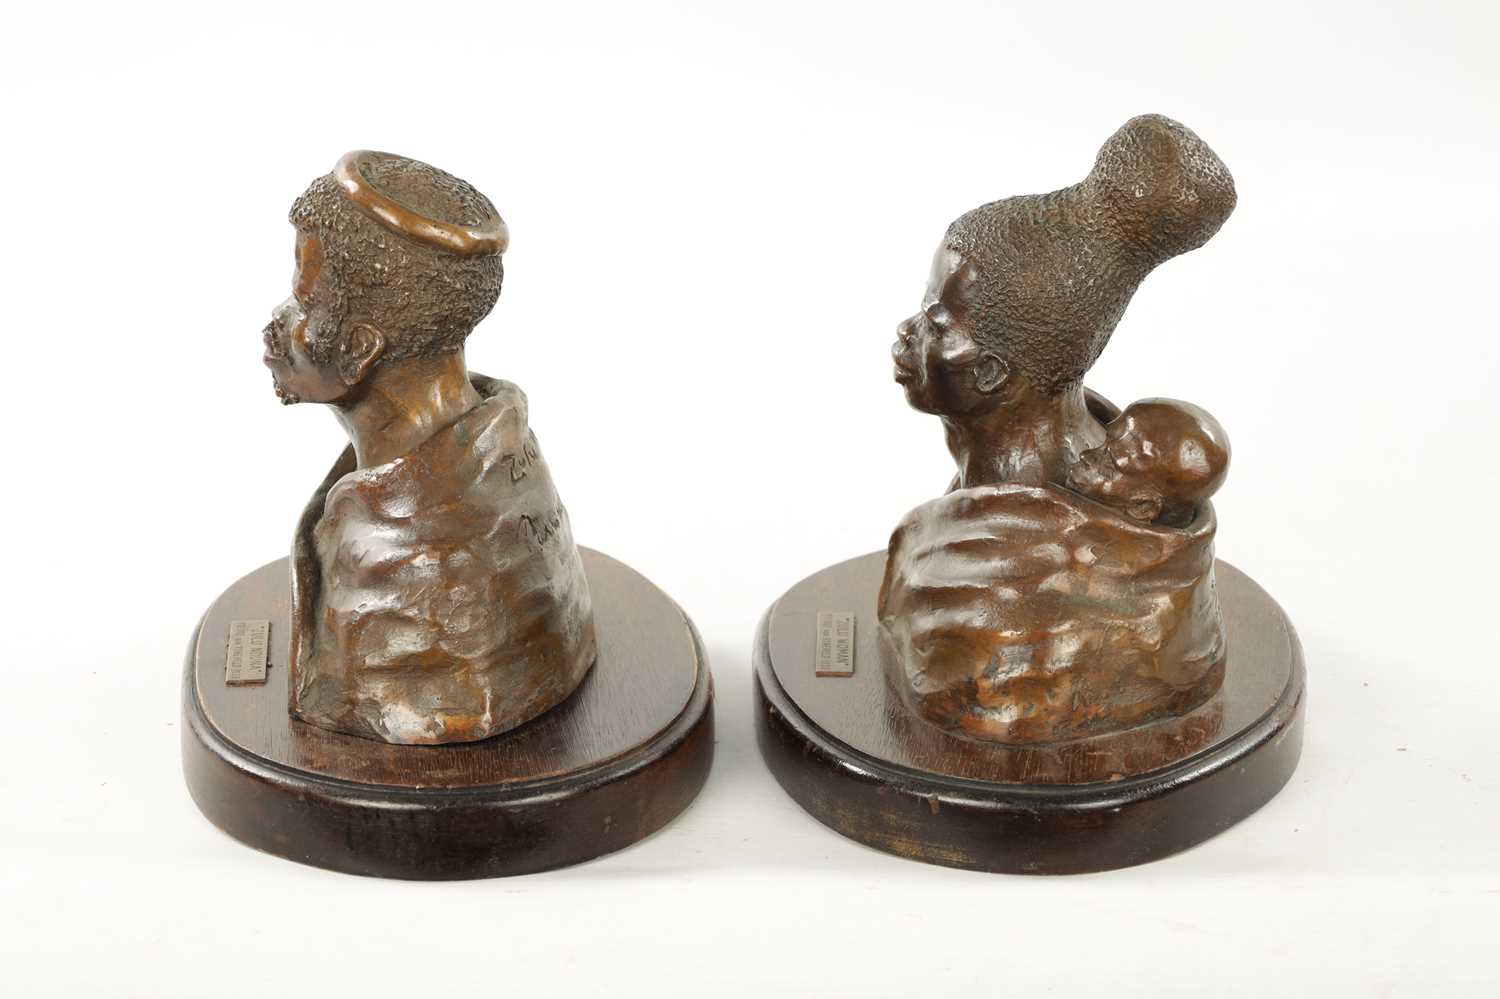 A PAIR OF 20TH CENTURY BRONZE SCULPTURES DEPICTING A ZULU WOMEN AND MAN BY PIERRE VAN RYNEVELD SIGNE - Image 7 of 10